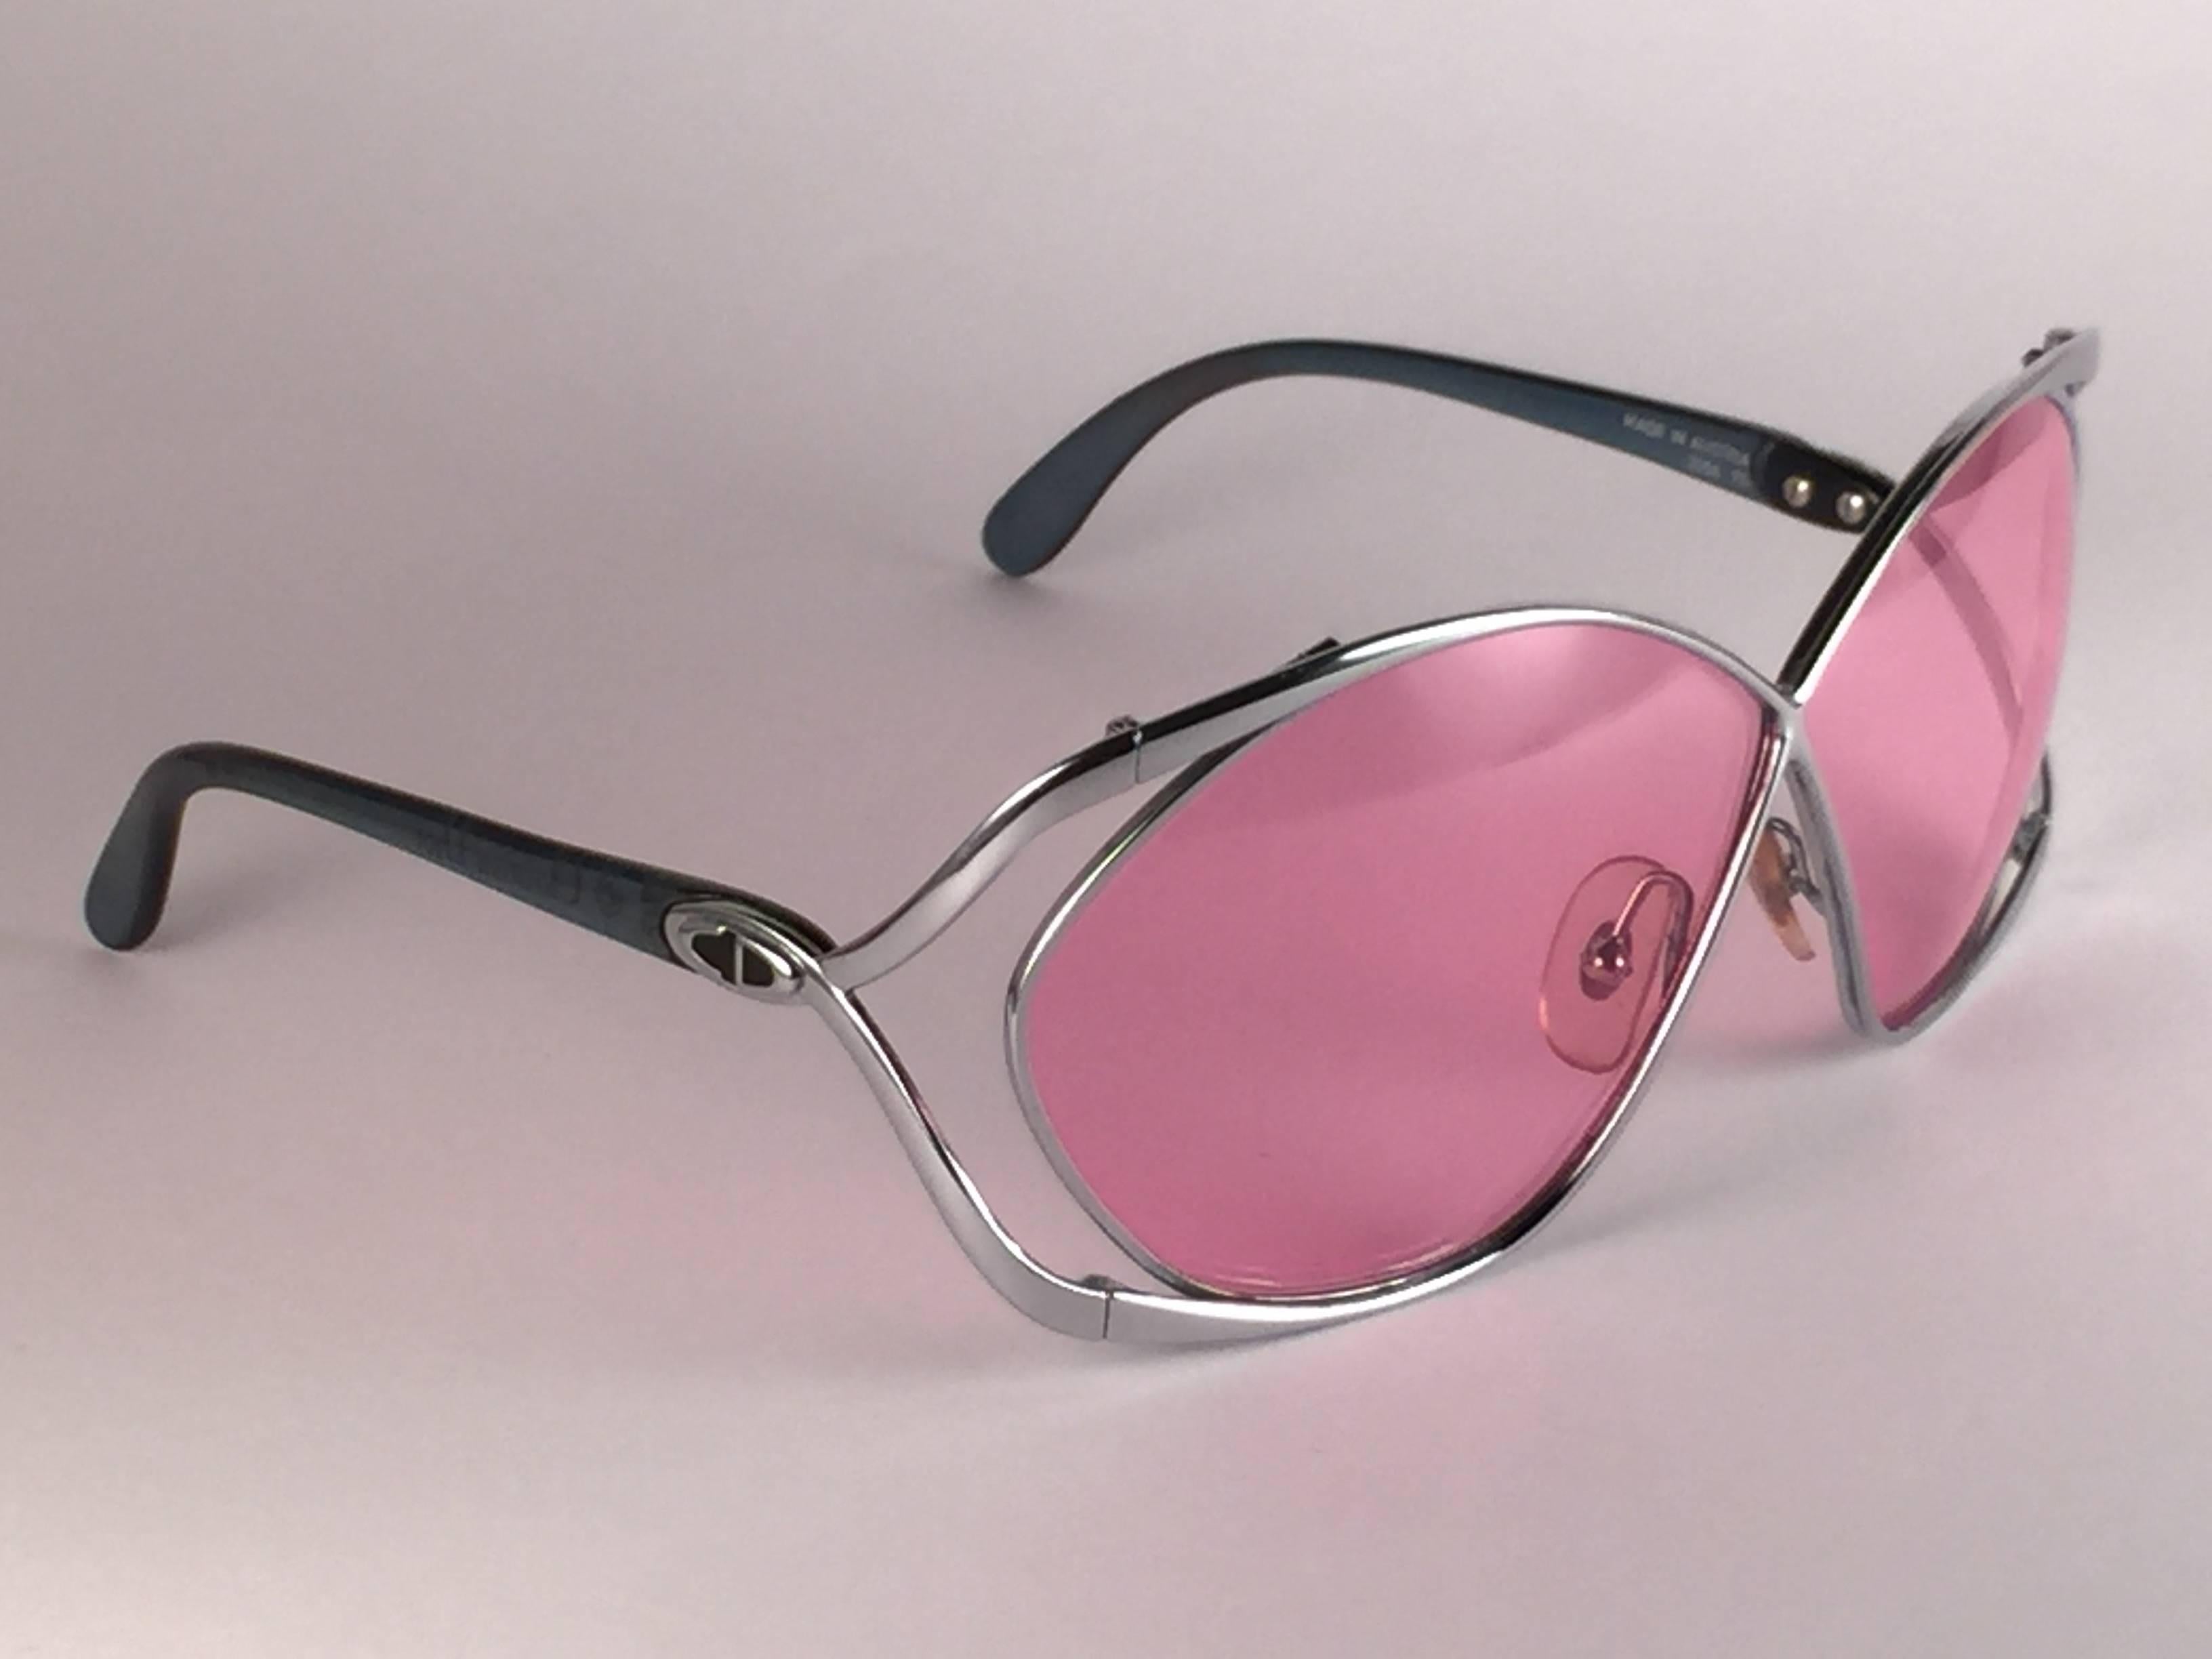  Highly coveted Christian Dior butterly shape in sleek silver. Spotless candy pink lenses. A collector’s piece!  Come with its original Christian Dior lunettes sleeve.  New, never worn or displayed. Made in Austria.